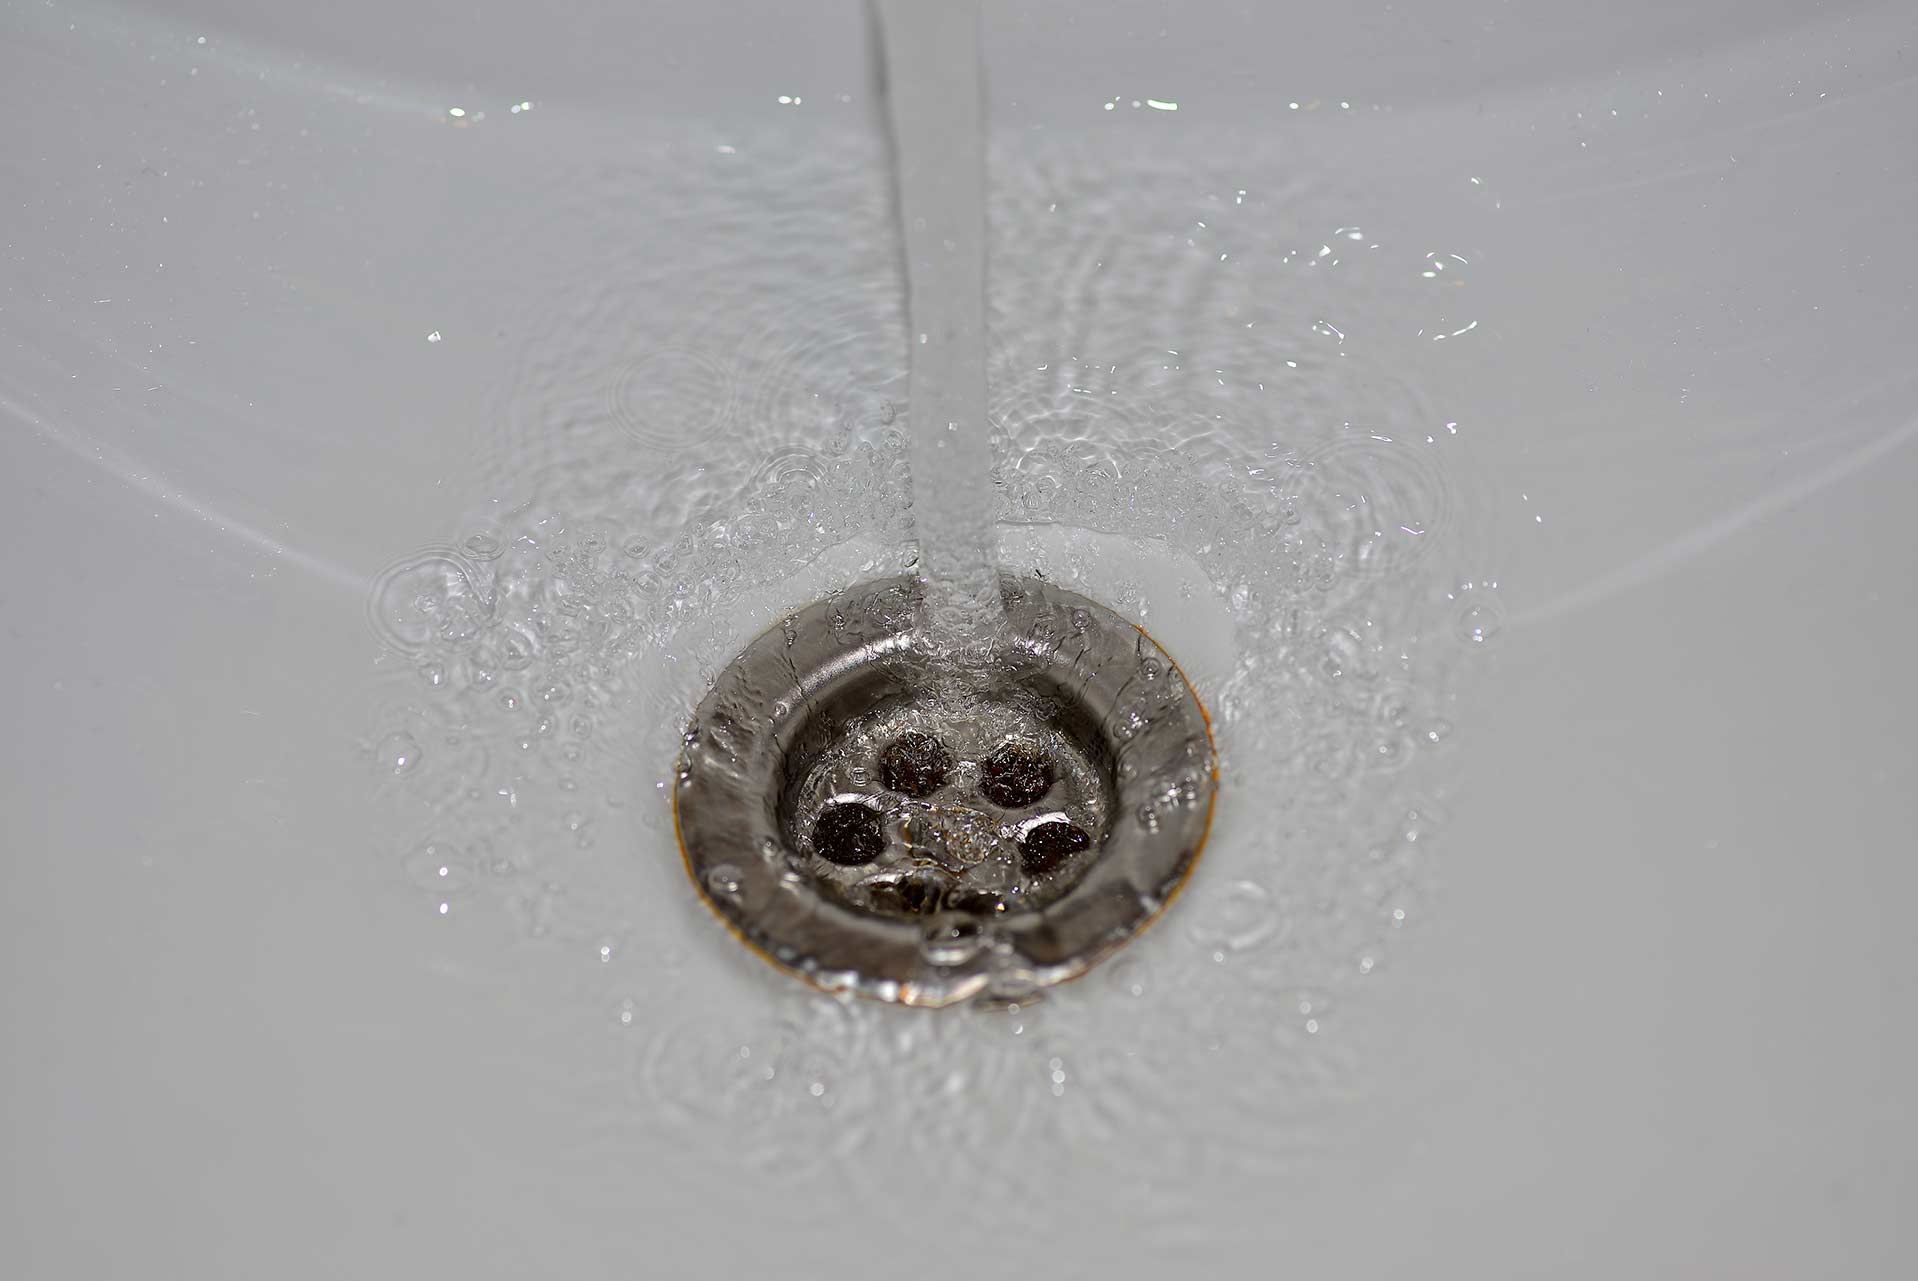 A2B Drains provides services to unblock blocked sinks and drains for properties in Leighton Buzzard.